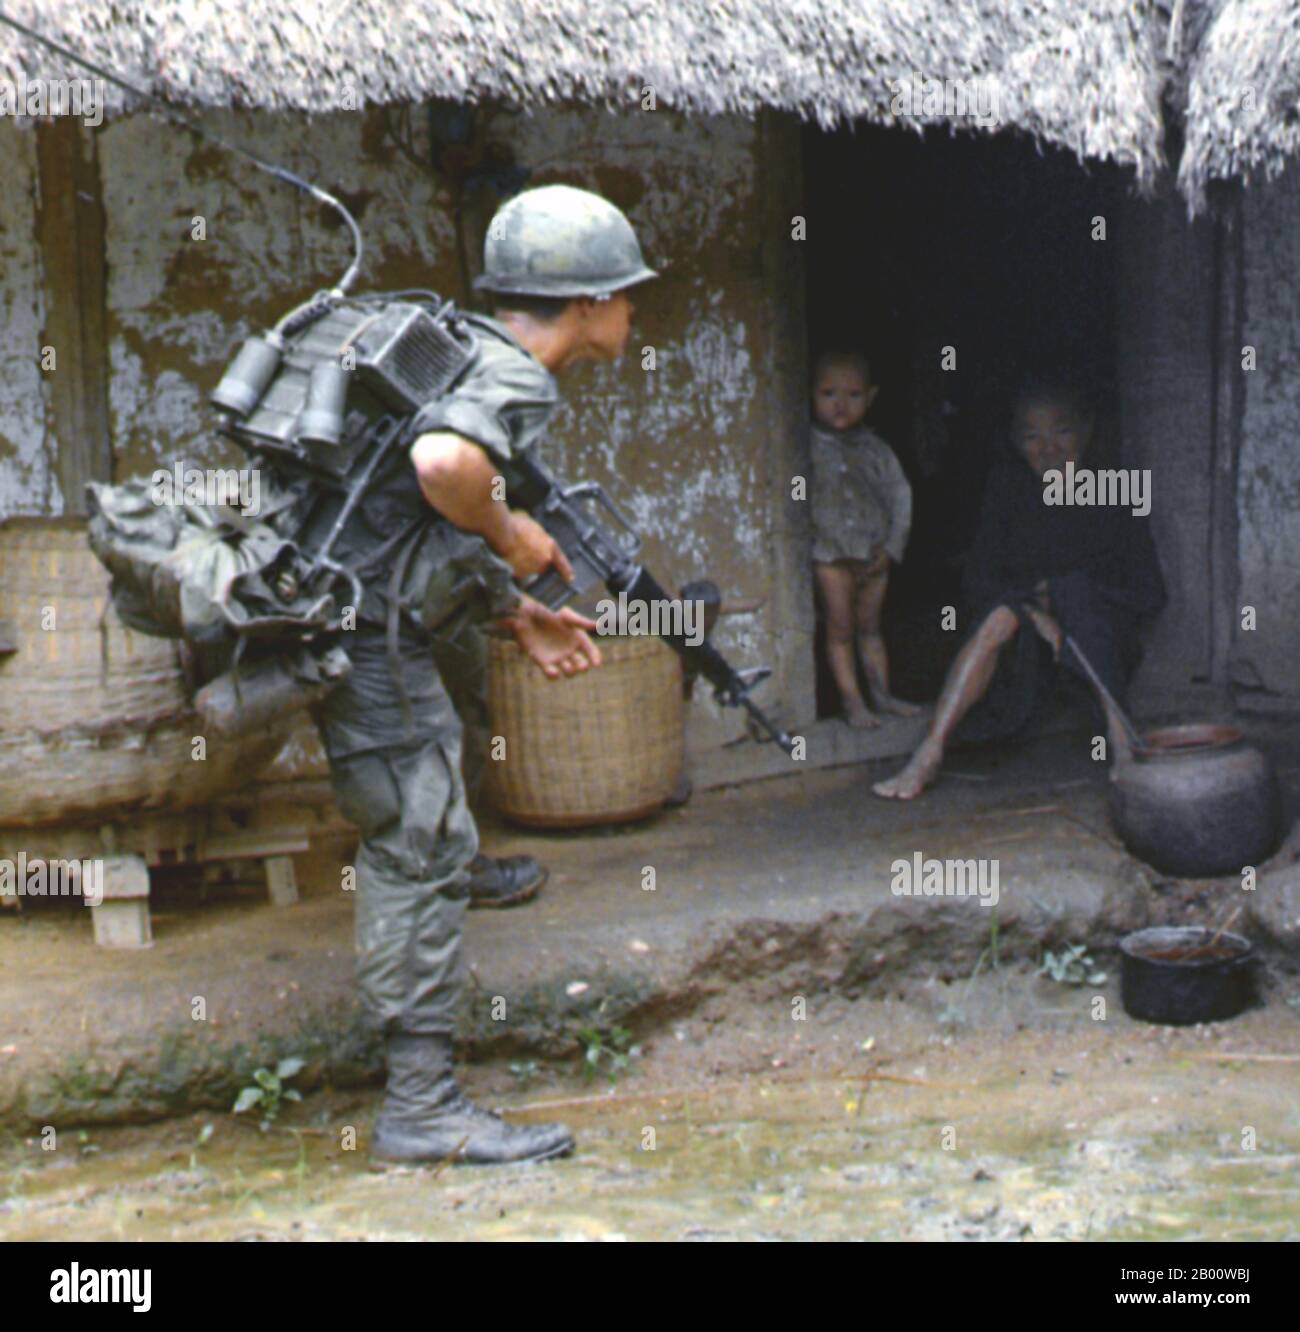 Vietnam: ARVN (Army of the Republic of Vietnam) soldier interrogating villagers, South Vietnam, c. 1965.  The Army of the Republic of Vietnam (ARVN) was the land-based military forces of the Republic of Vietnam (South Vietnam), which existed from October 26, 1955 until the fall of Saigon on April 30, 1975. After the fall of Saigon and the communist victory, the ARVN was dissolved. While some members had fled the country to the United States or elsewhere, hundreds of thousands of former ARVN soldiers were sent to reeducation camps by the newly unified Vietnamese communist government. Stock Photo